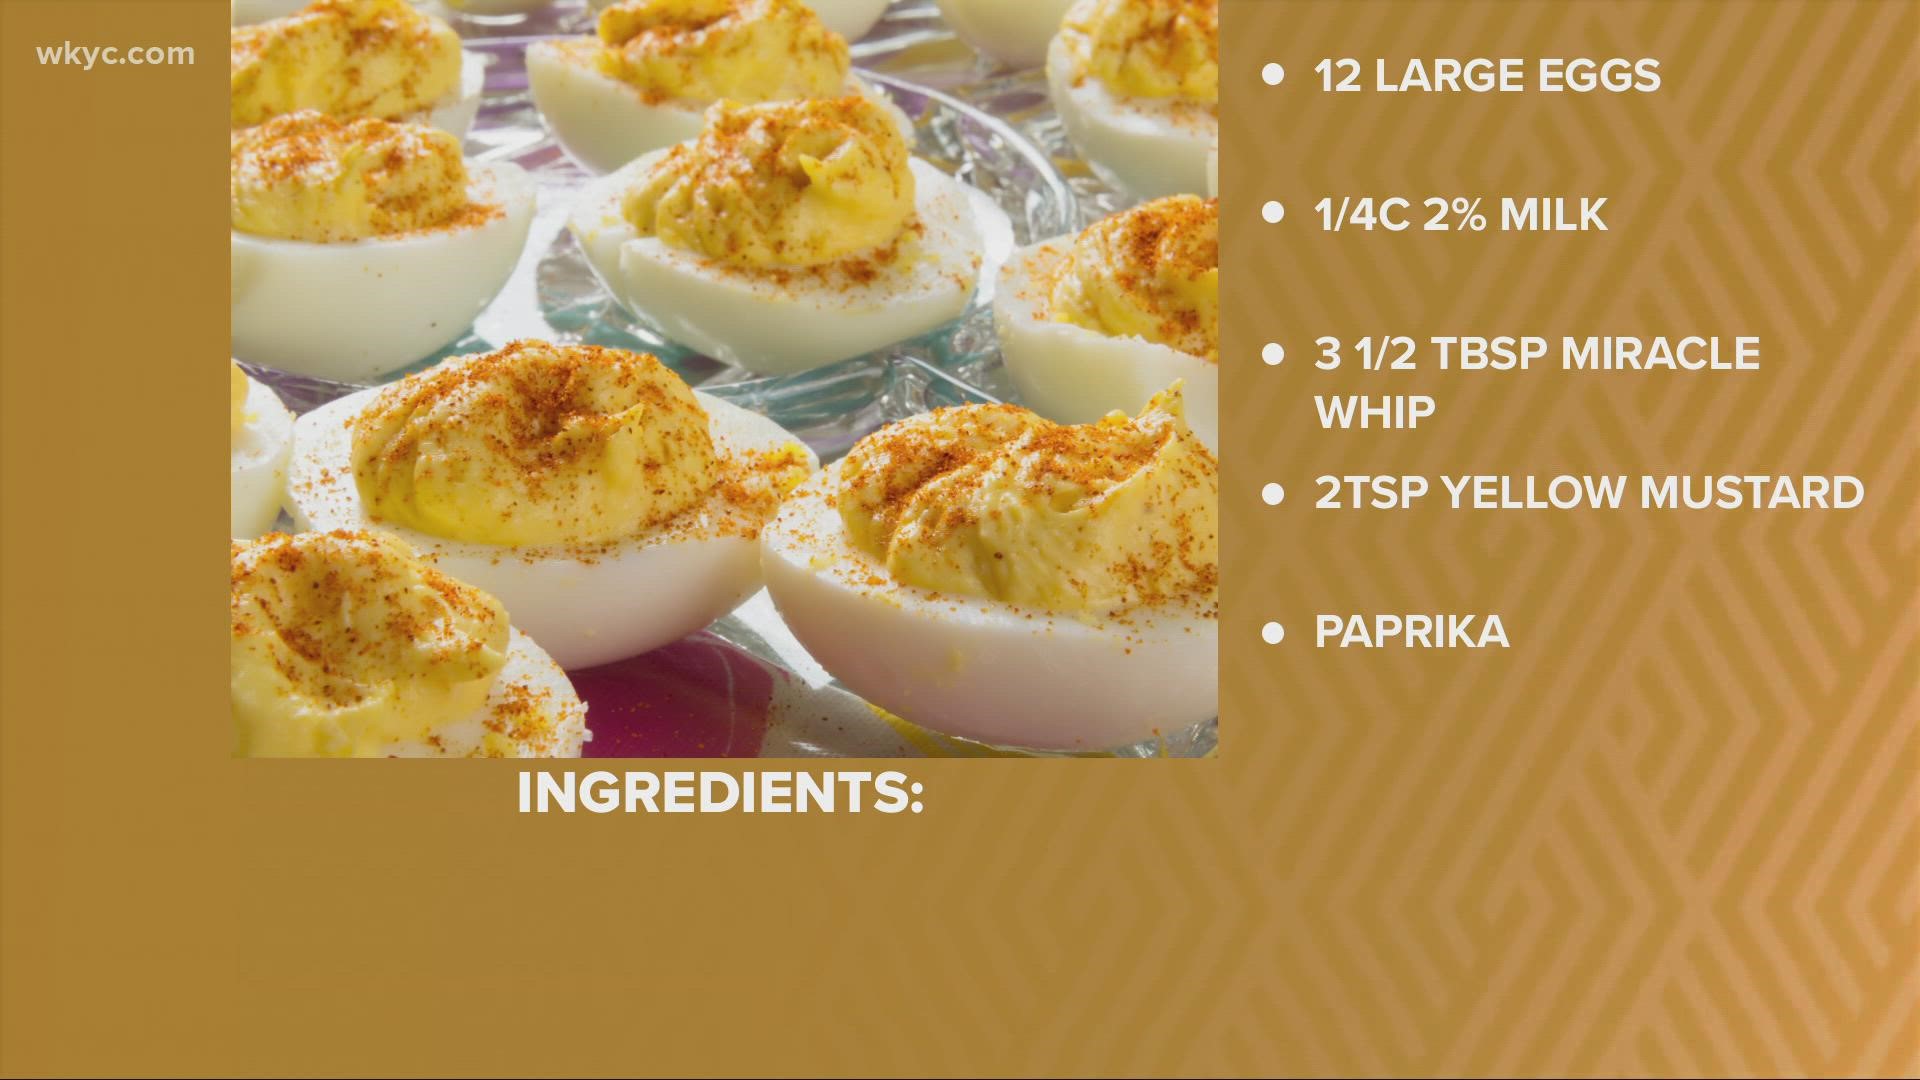 Looking to make deviled eggs for Thanksgiving? 3News Digital Anchor Stephanie Haney shares her recipe for deviled eggs.